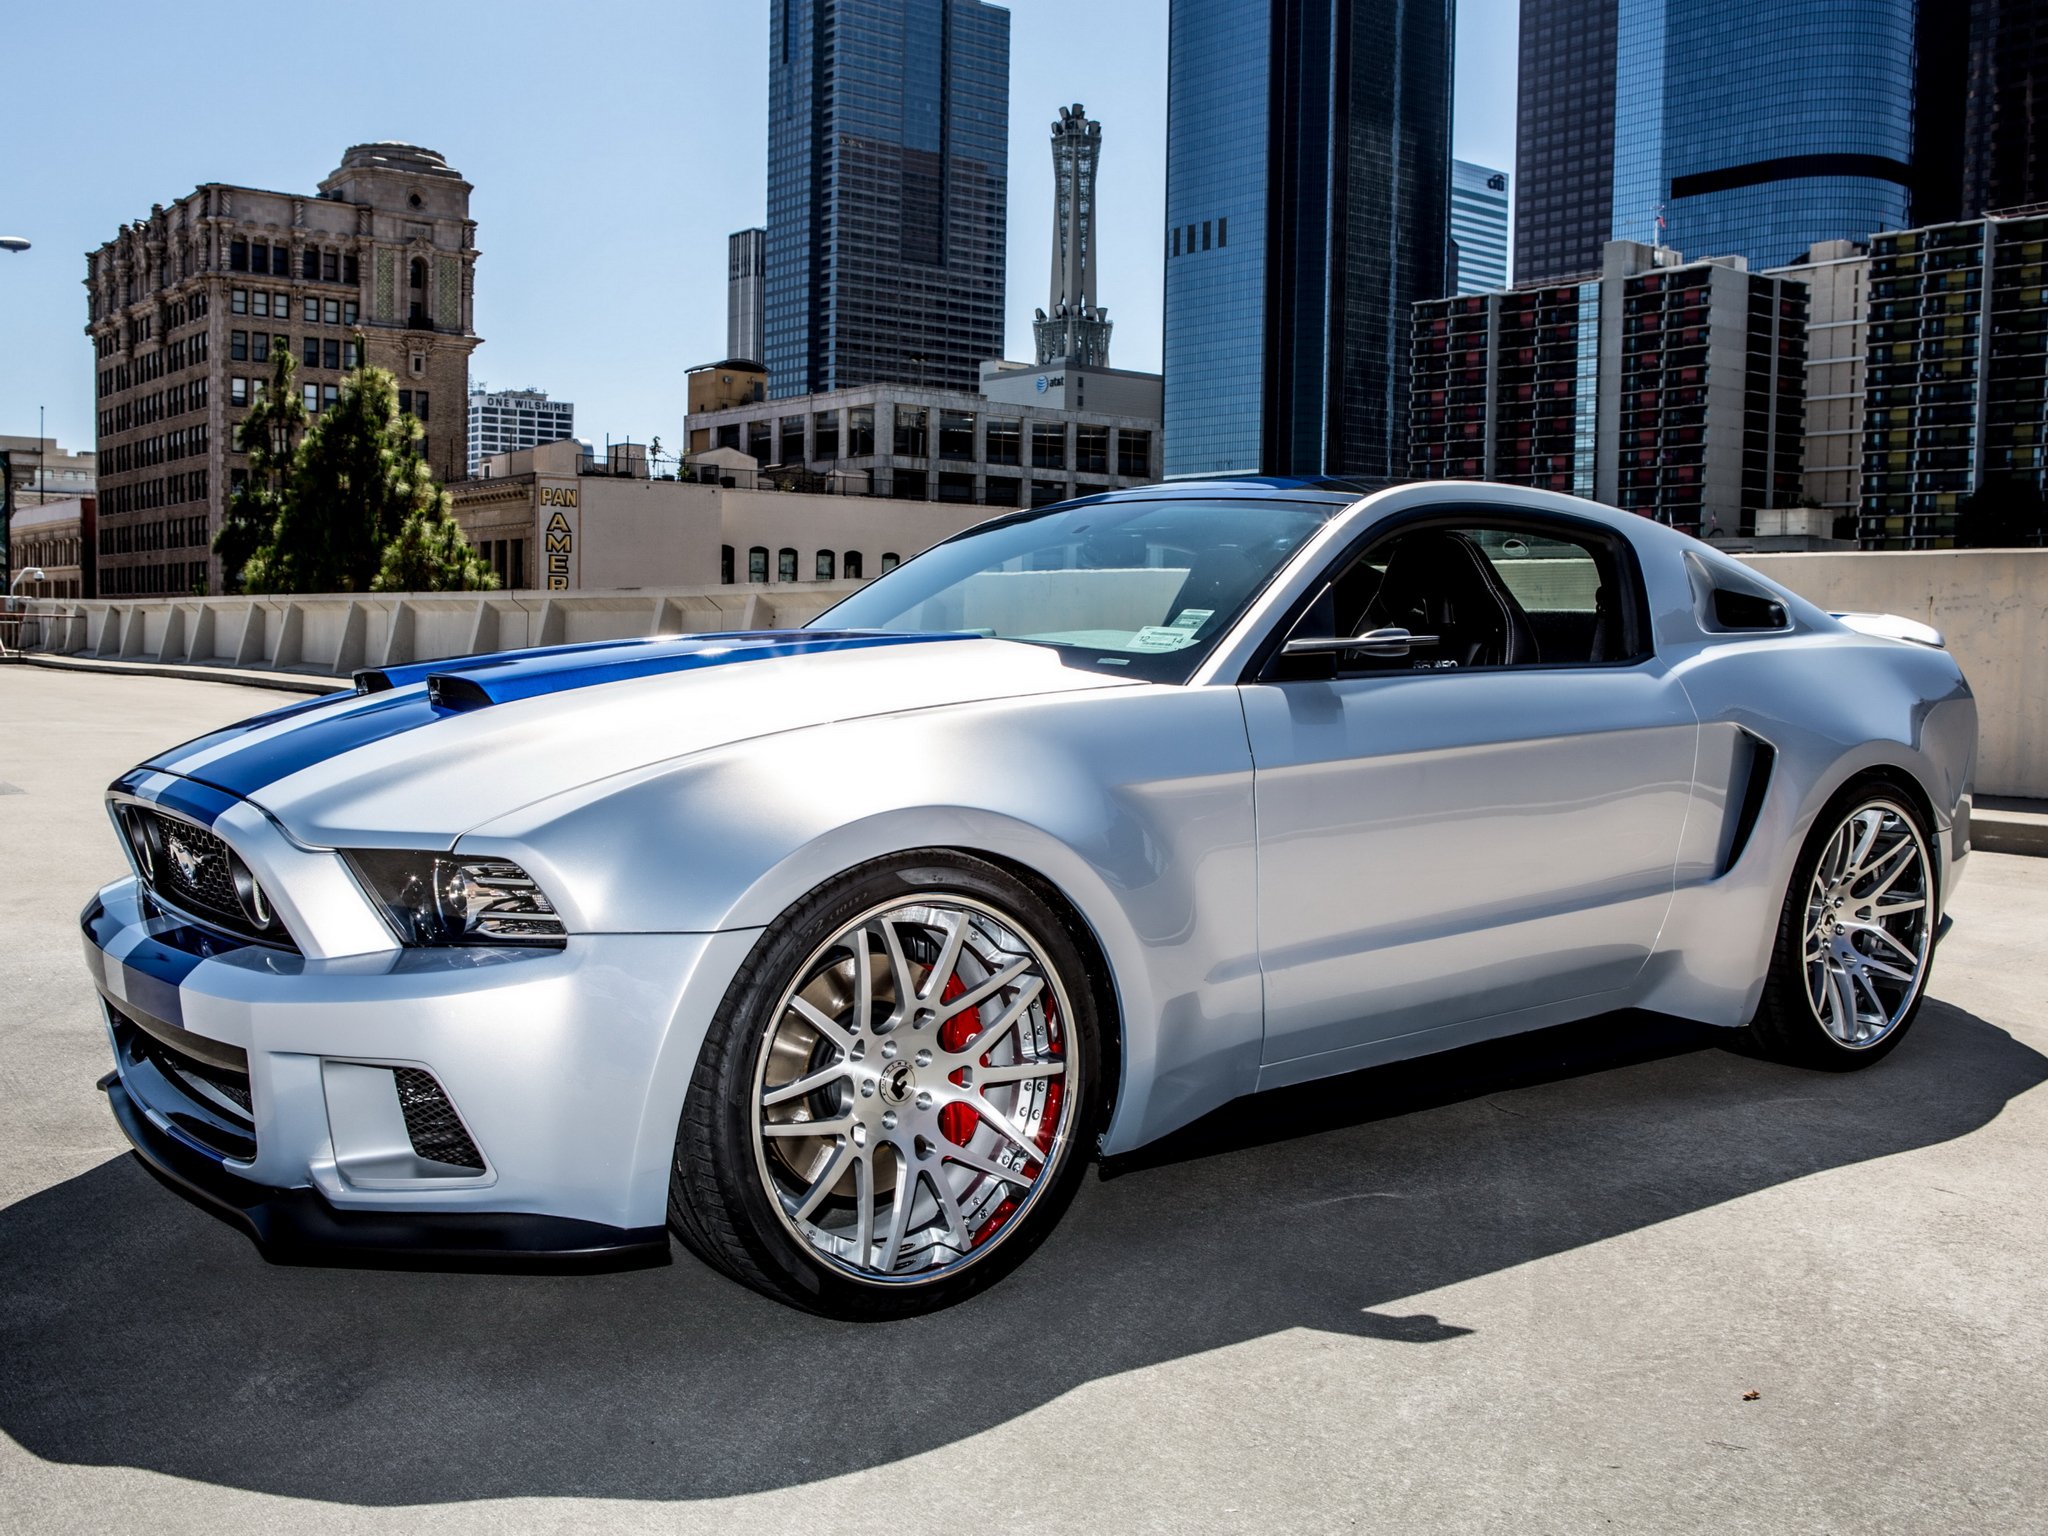 2014, Ford, Mustang, G t, Need, For, Speed, Movoe, Film, Supercar, Muscle, Hot, Rod, Rods, Tuning Wallpaper